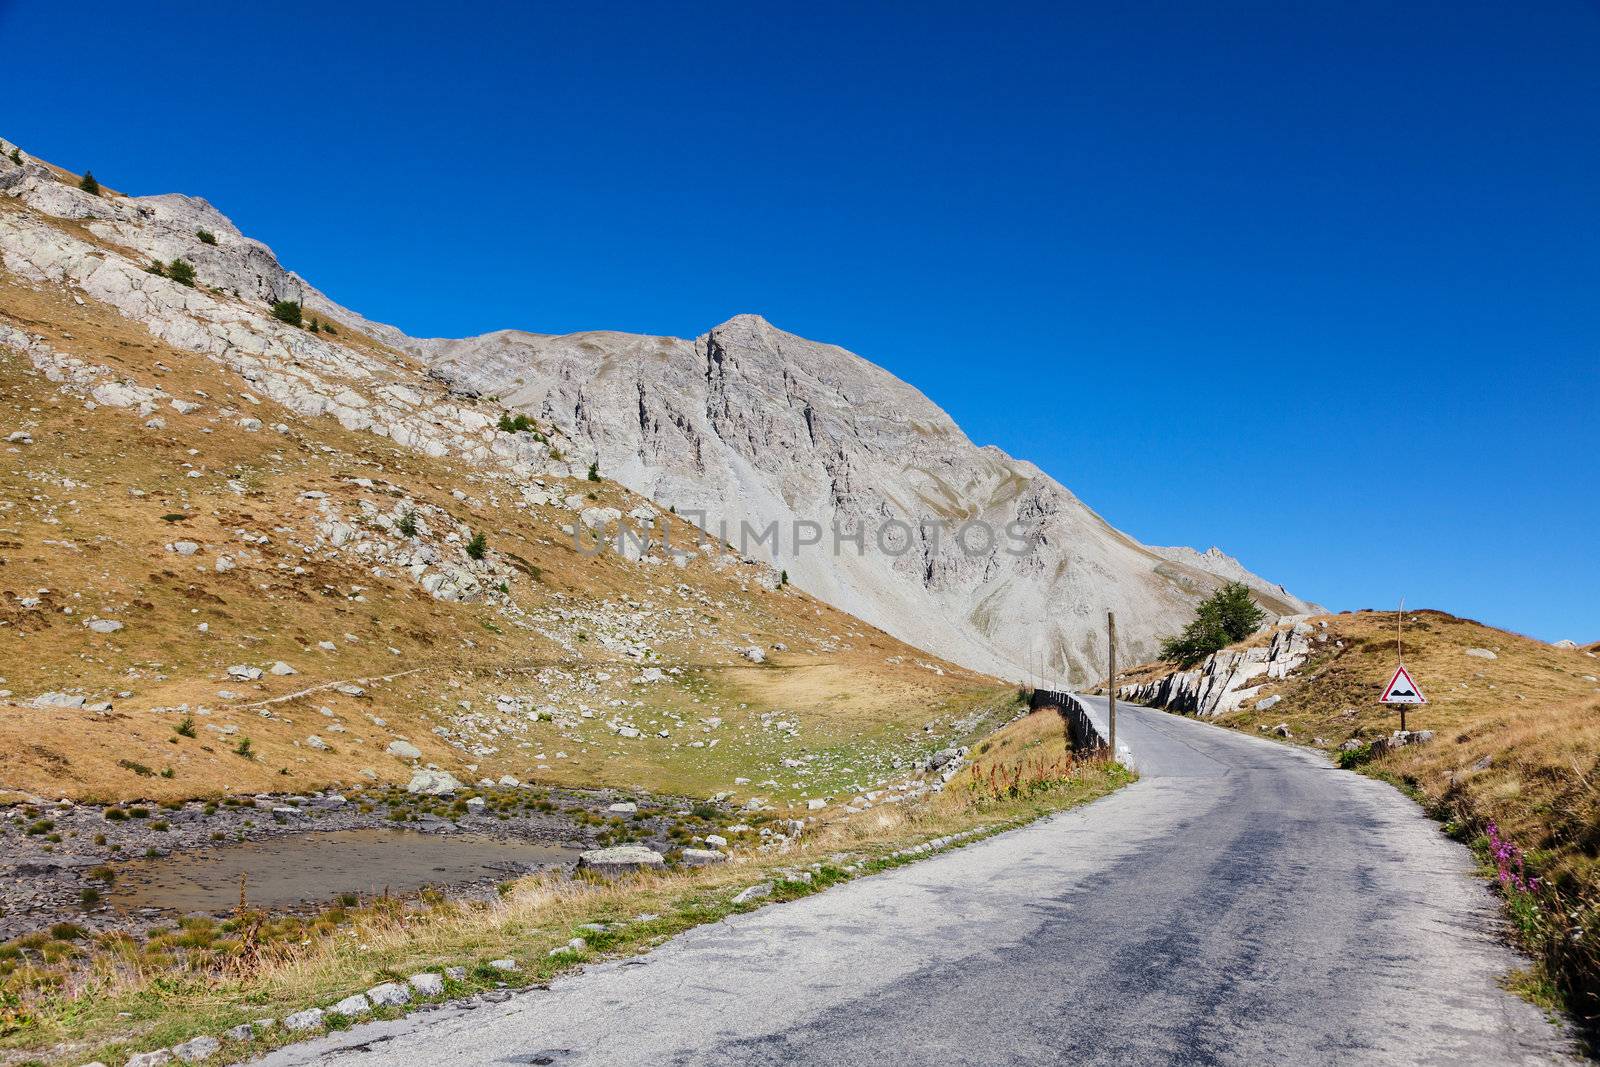 Image of the road to Col de la Cayolle ( 2326 m) located in the Southern French alps in Alpes-de-Haute-Provence department.